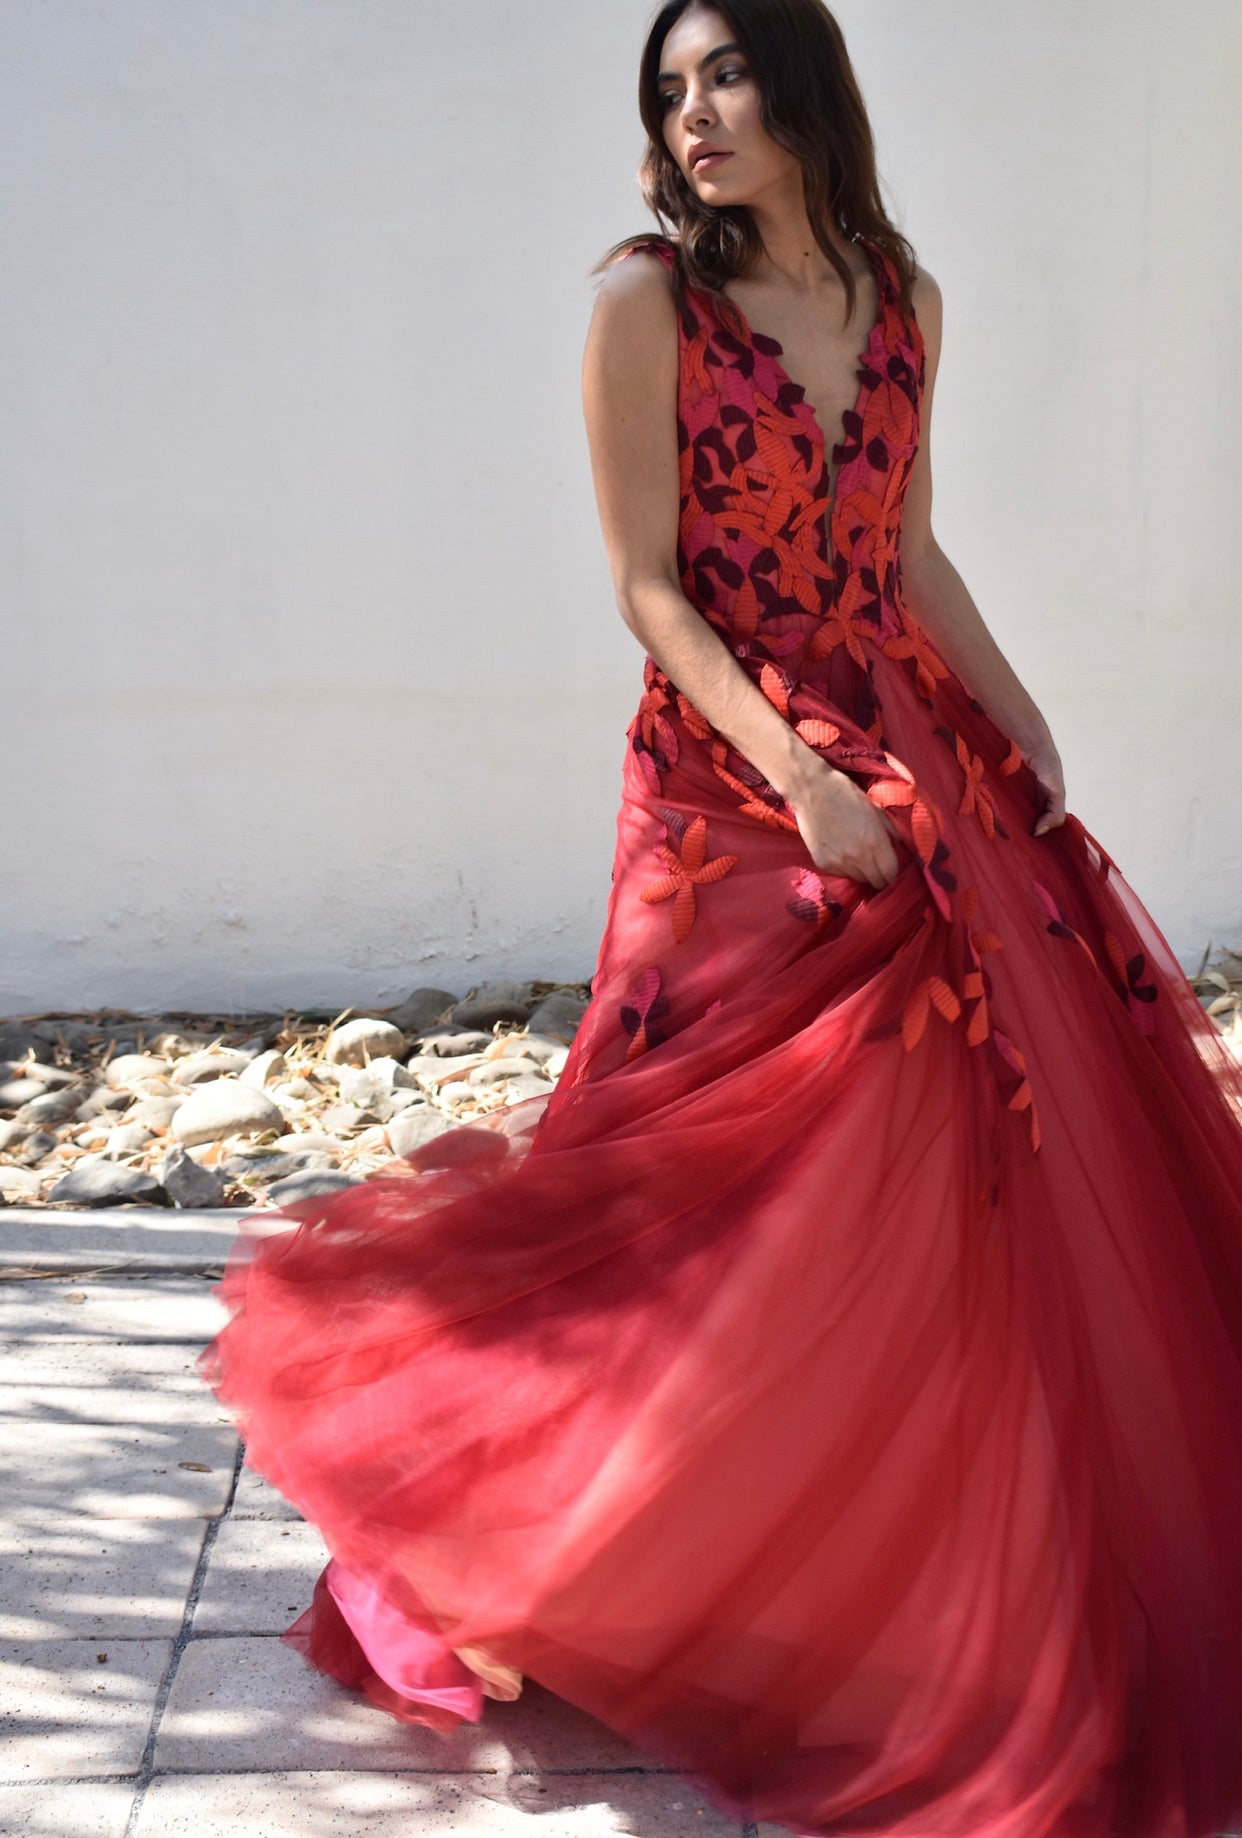 The tulle floral gown